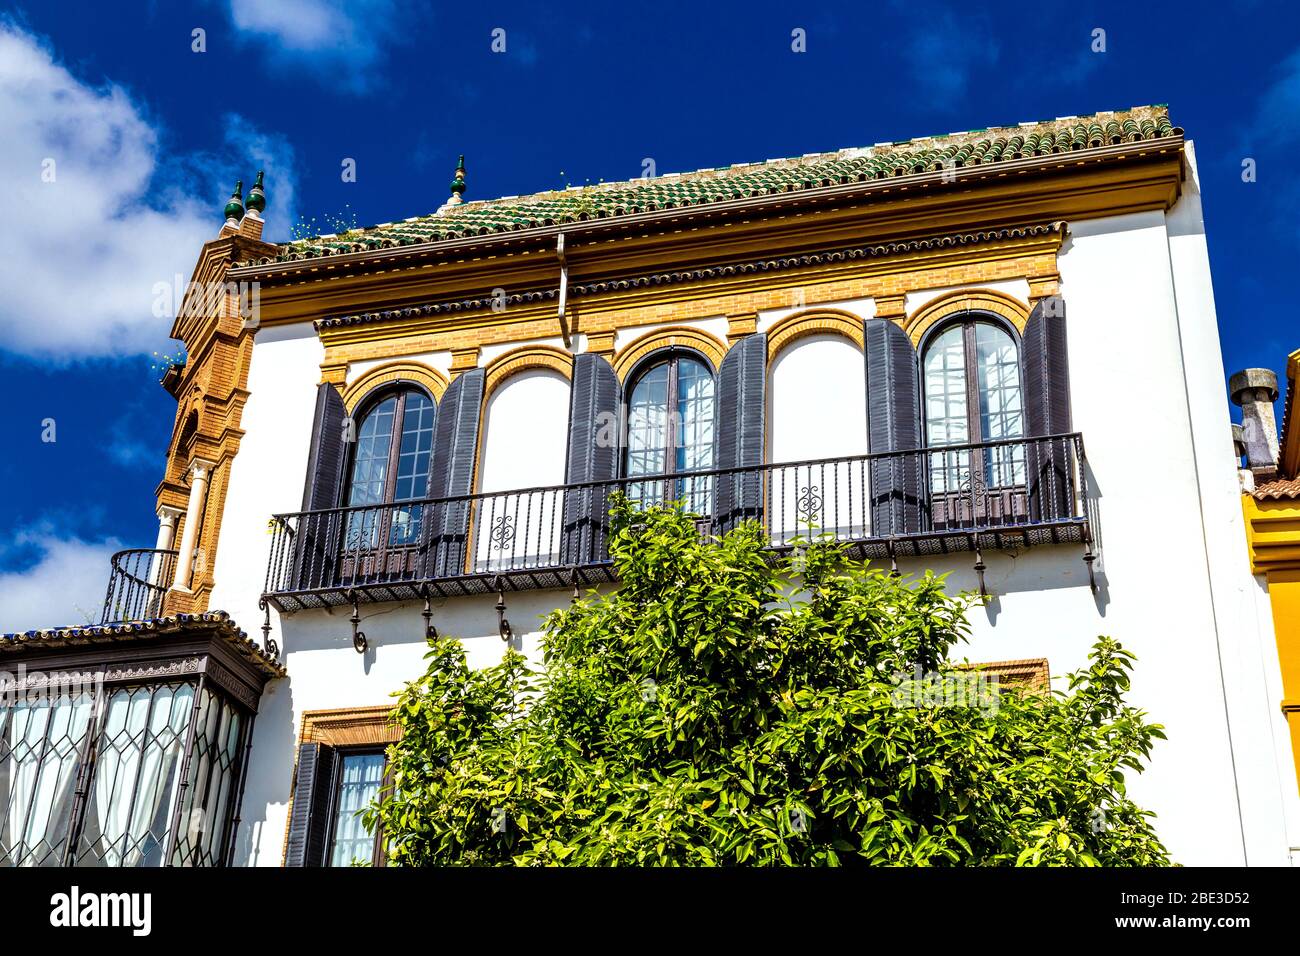 Spanish architecture, white and yellow building with shutters in Seville, Andalusia, Spain Stock Photo